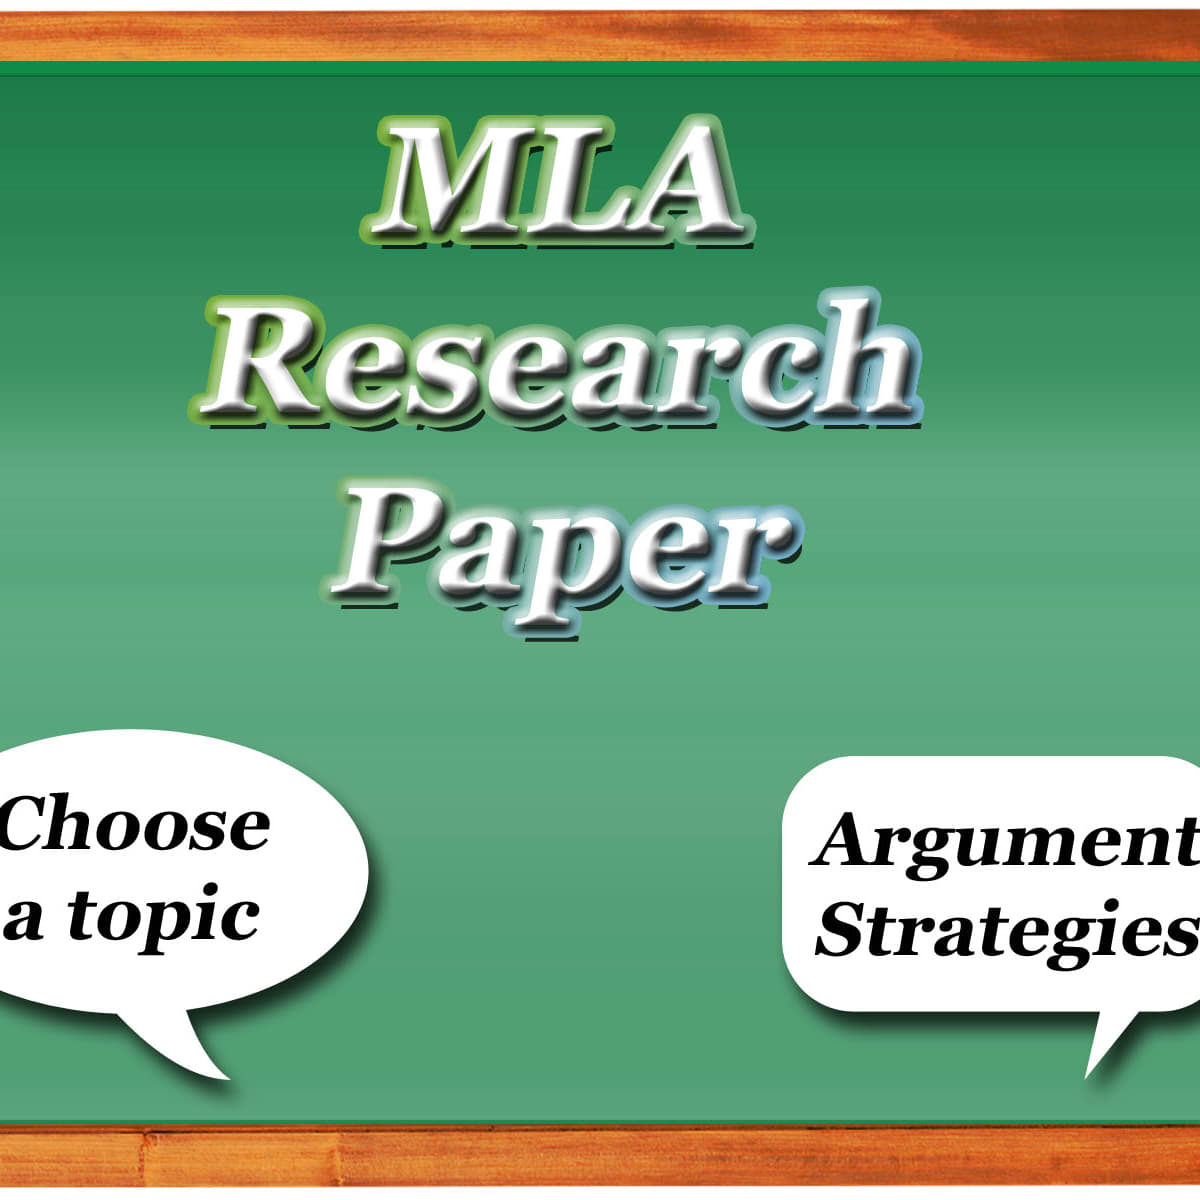 steps to writing a research paper